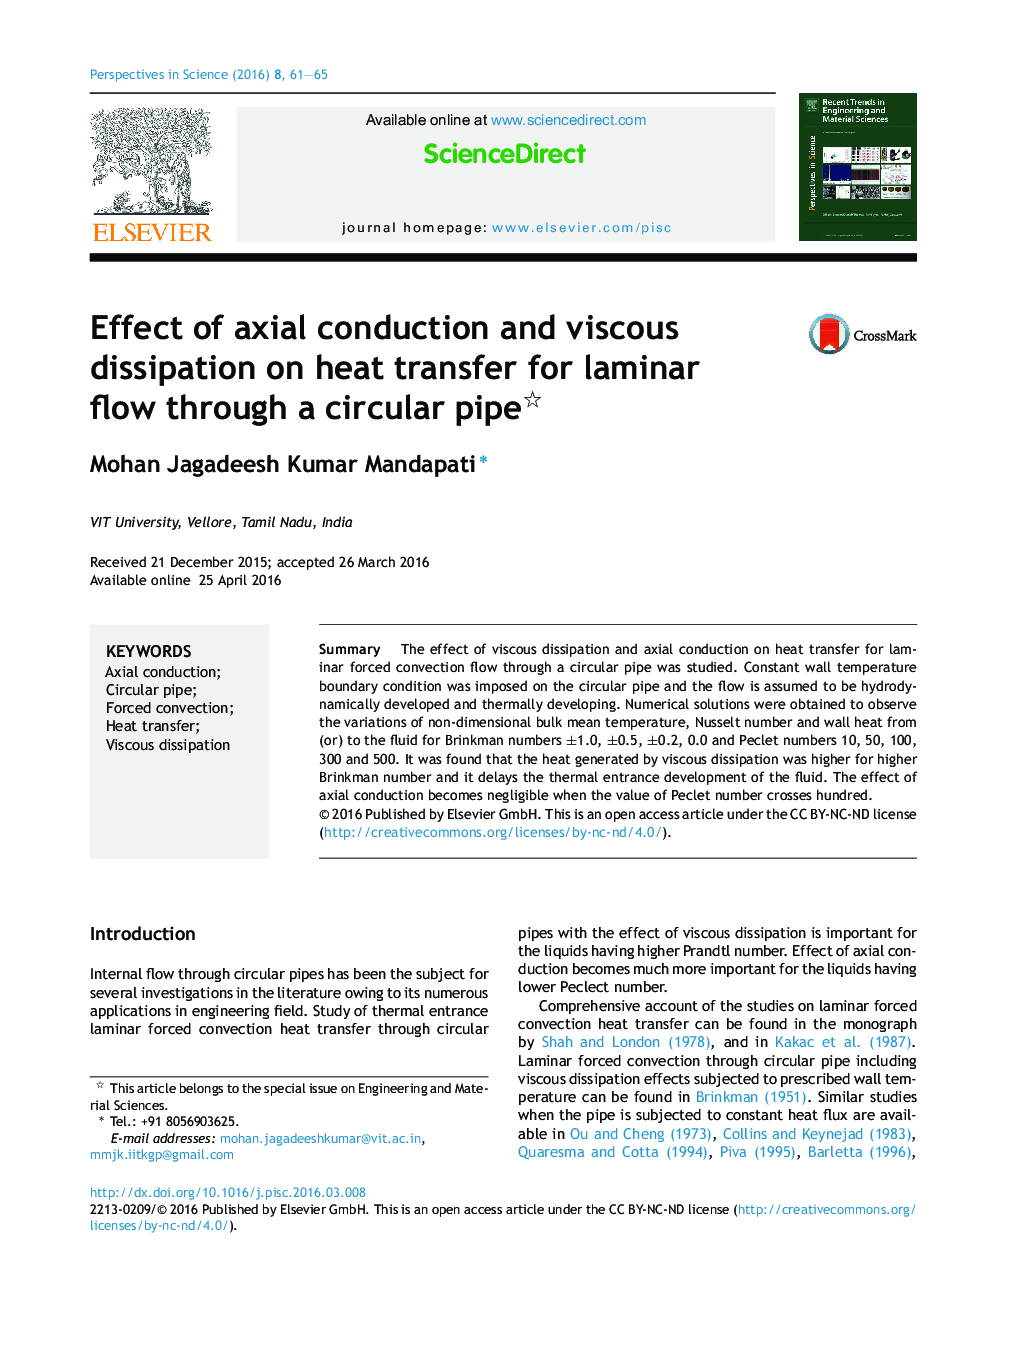 Effect of axial conduction and viscous dissipation on heat transfer for laminar flow through a circular pipe